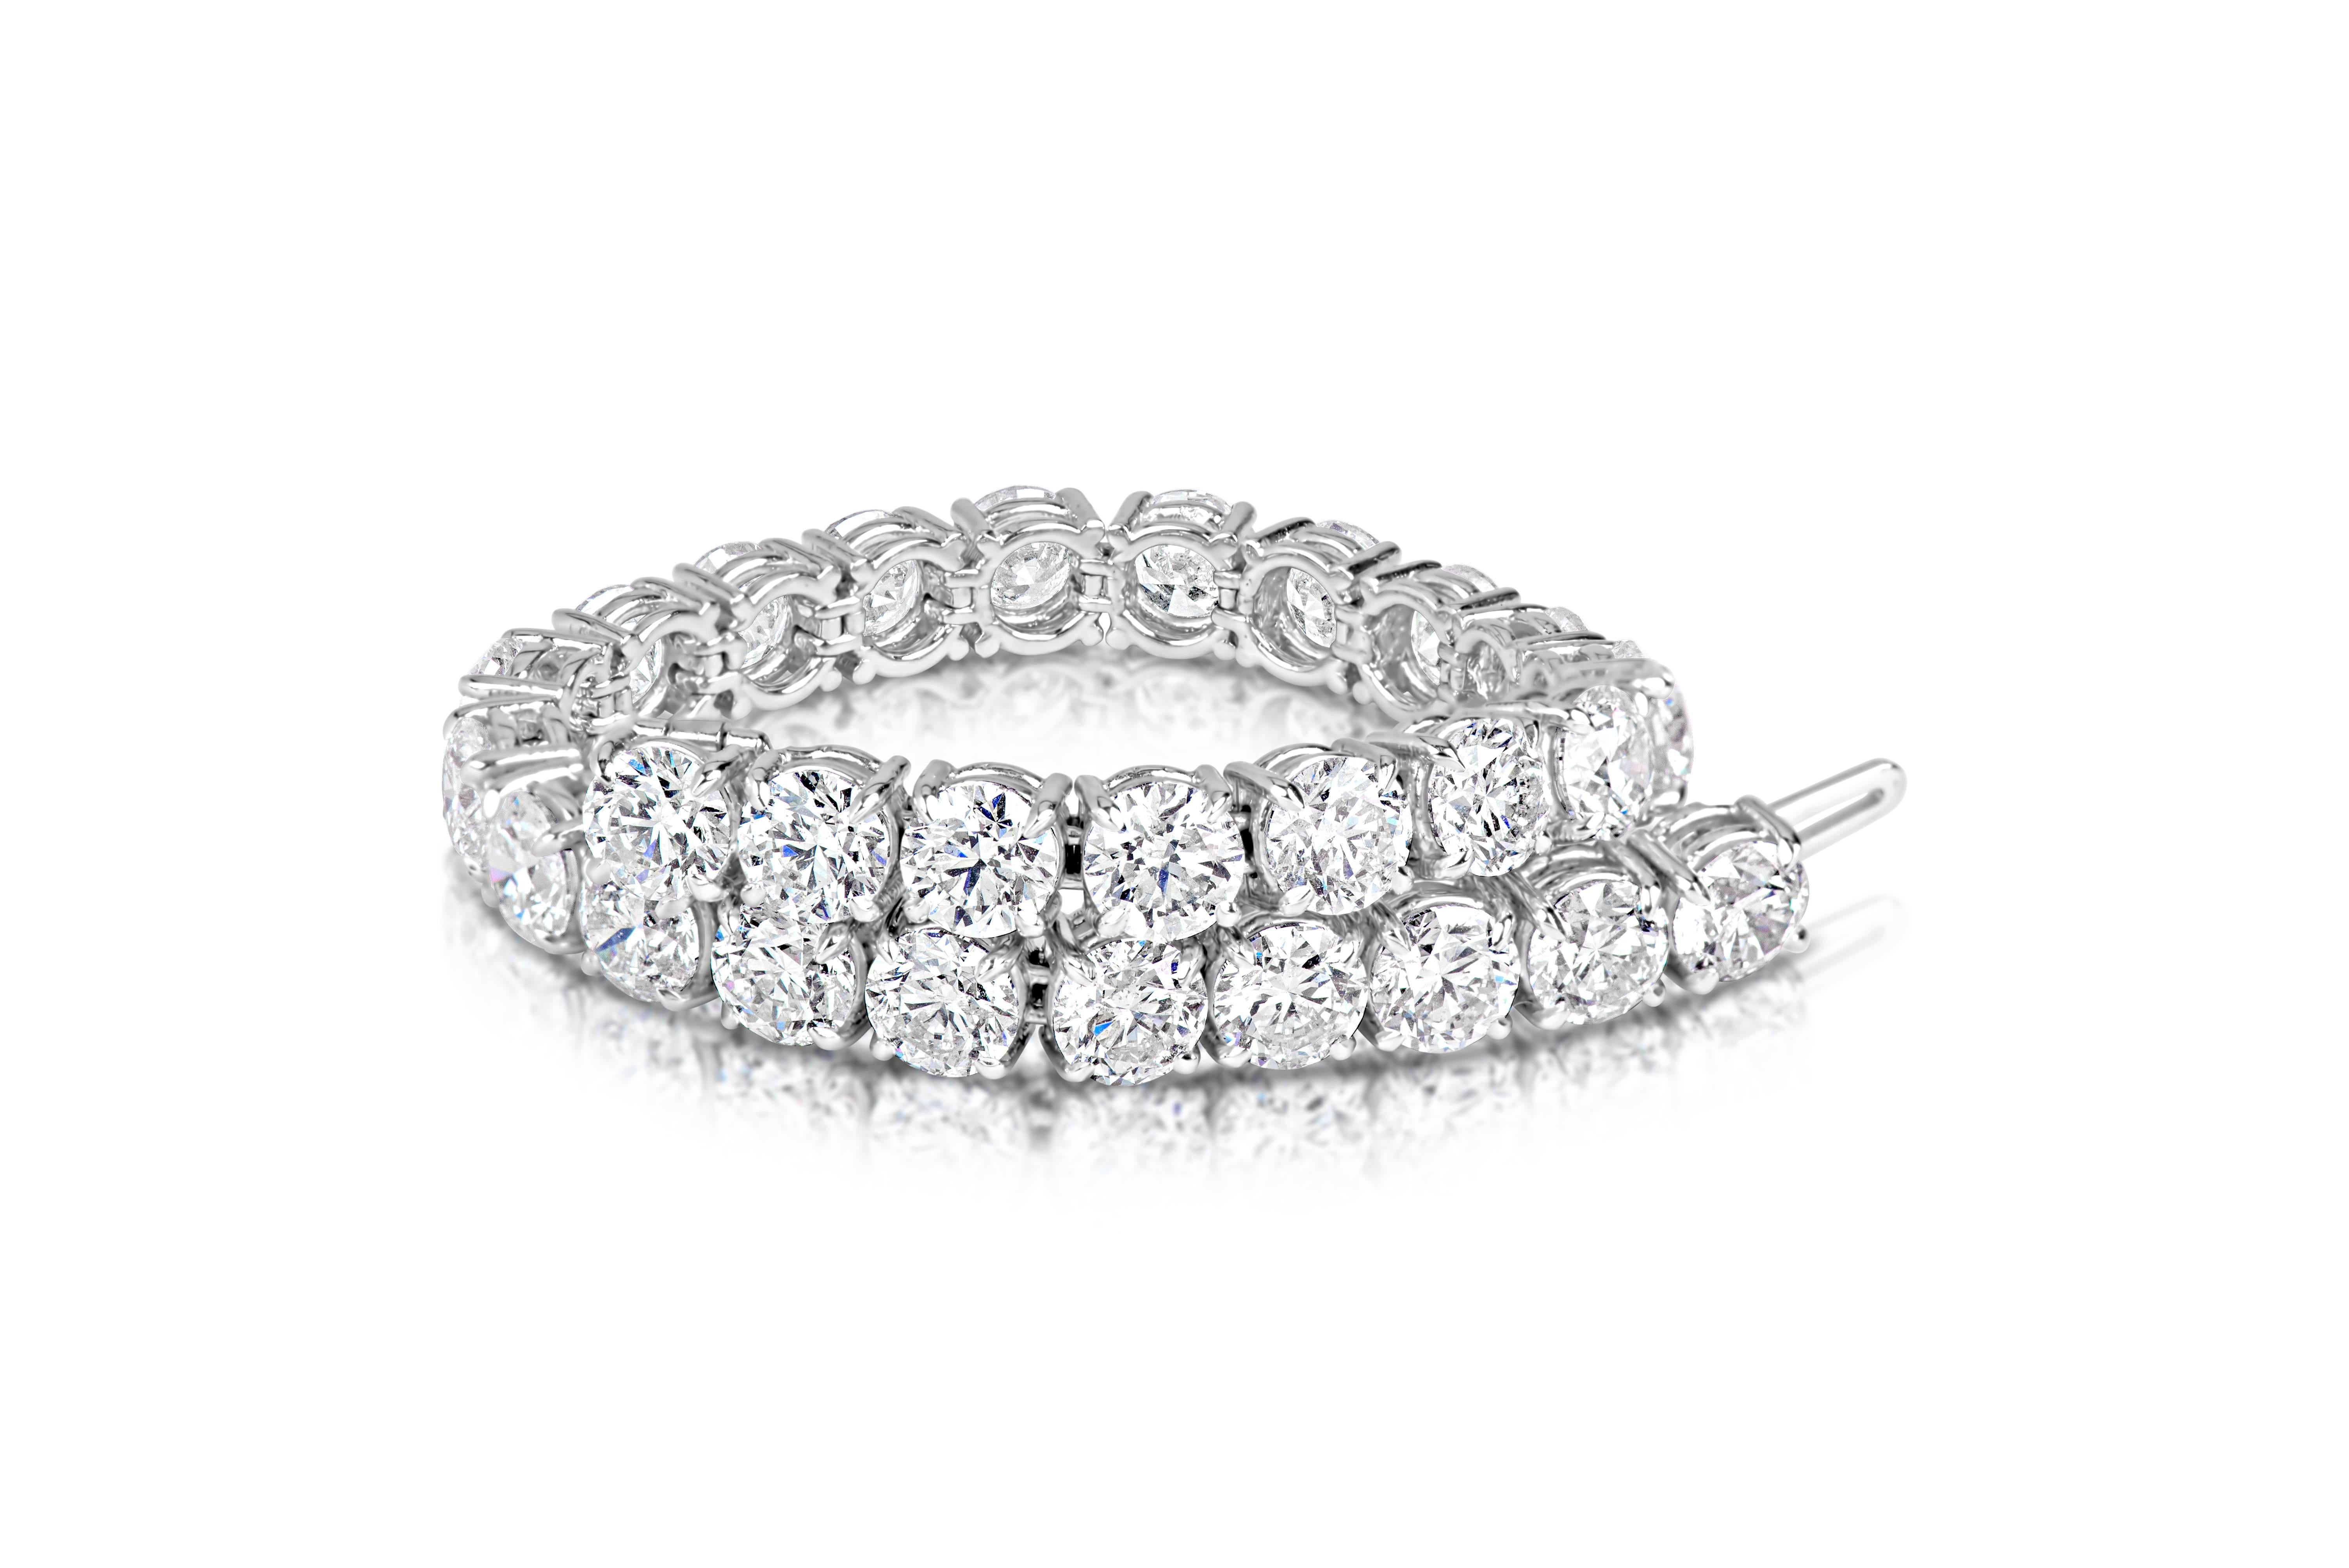 This One of a Kind Bracelet Features:

Diamond Count: 28 Diamond
Diamond Weight: 28.80 Cts.
Average Weight of Diamond : 1.03
Color: H-I
Clarity: SI2

All Stones have been hand selected and beautifully matched to achieve high brilliancy and they are